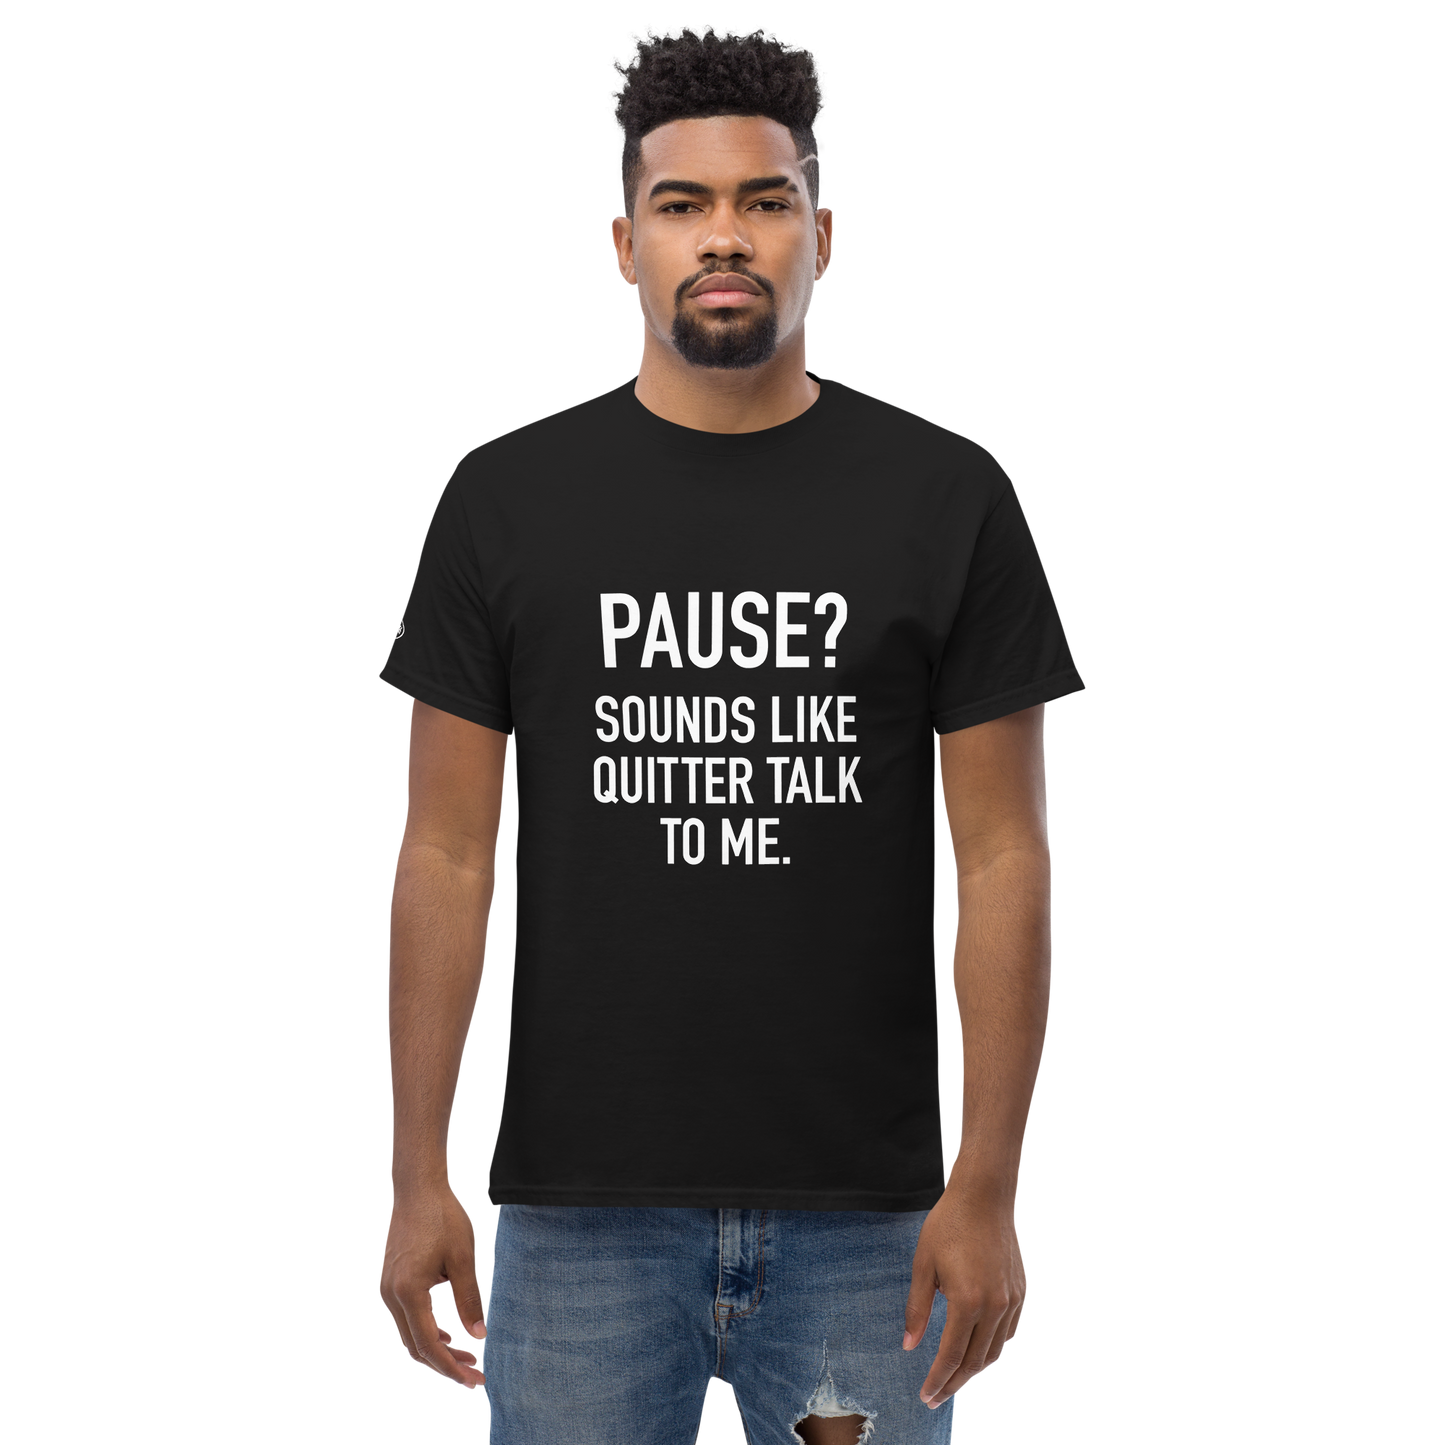 PAUSE? Sounds like Quitter Talk to Me - Funny T-Shirt